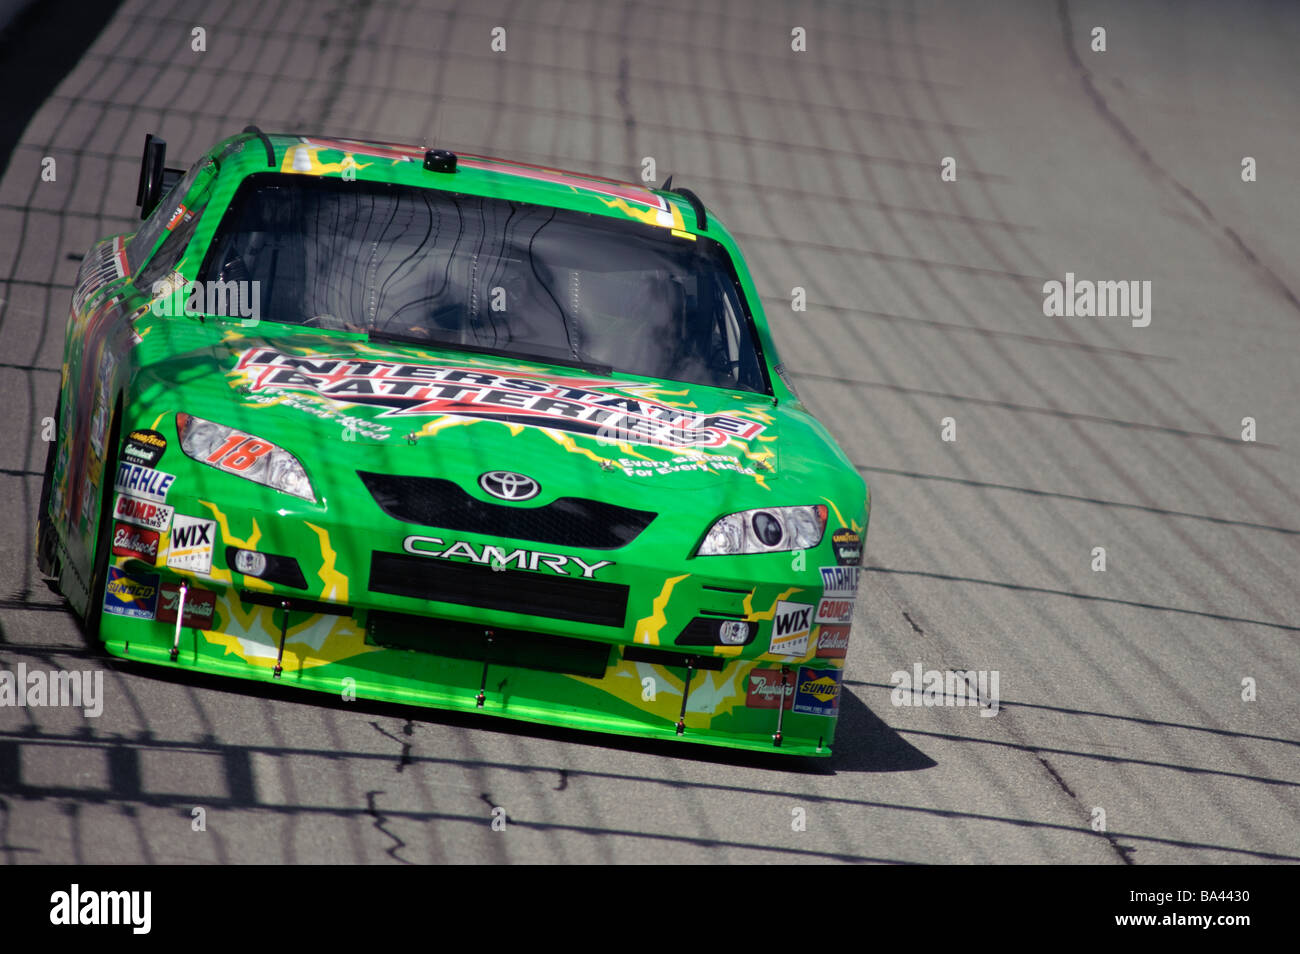 Kyle Busch drives his Interstate Batteries Toyota Camry in the 3M Performance 400 at Michigan International Speedway, 2008. Stock Photo